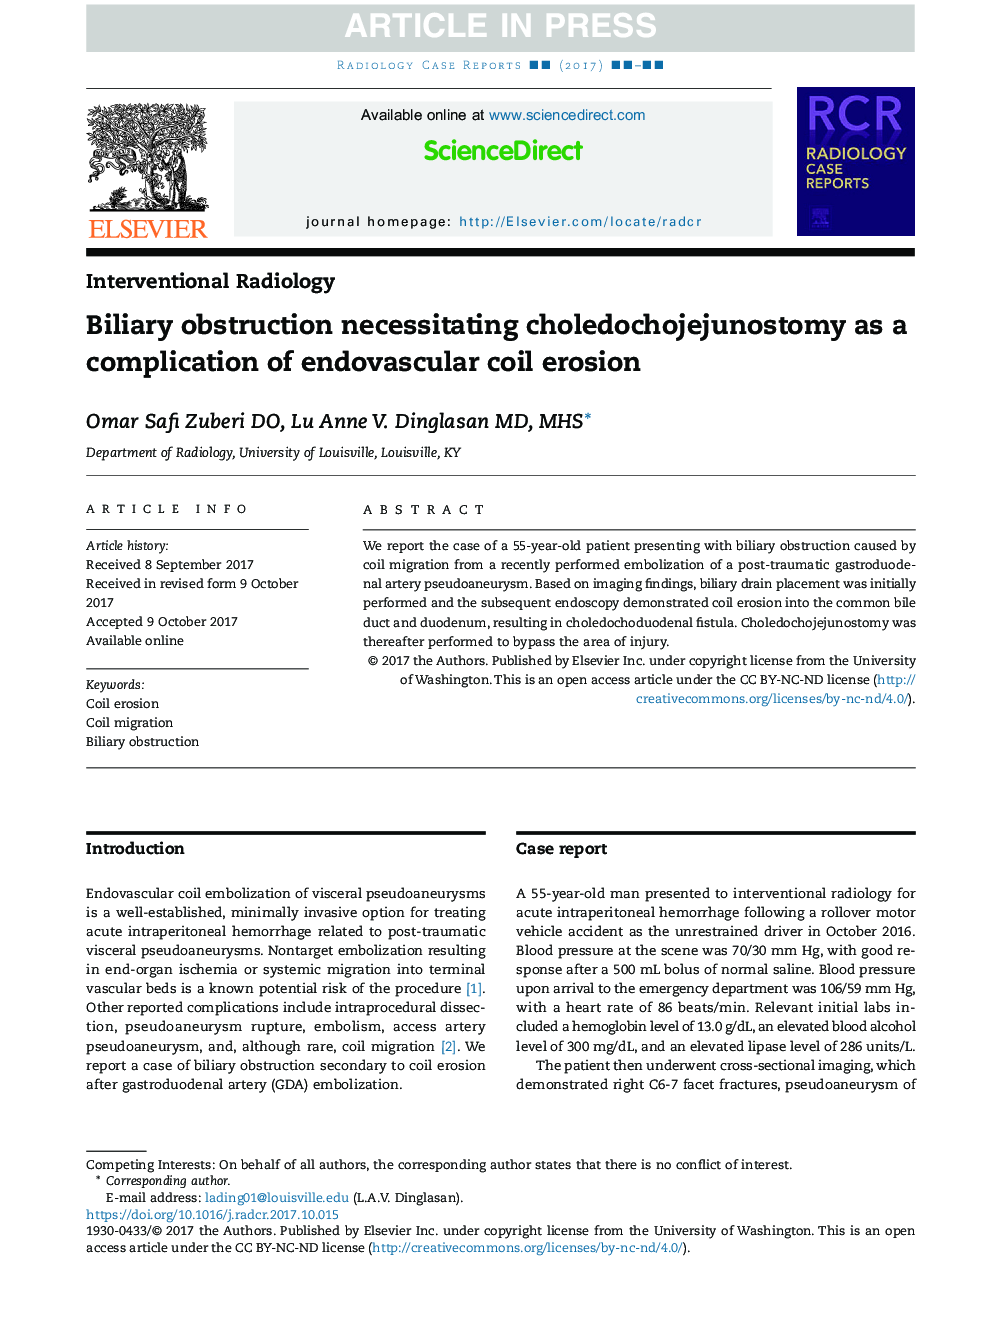 Biliary obstruction necessitating choledochojejunostomy as a complication of endovascular coil erosion